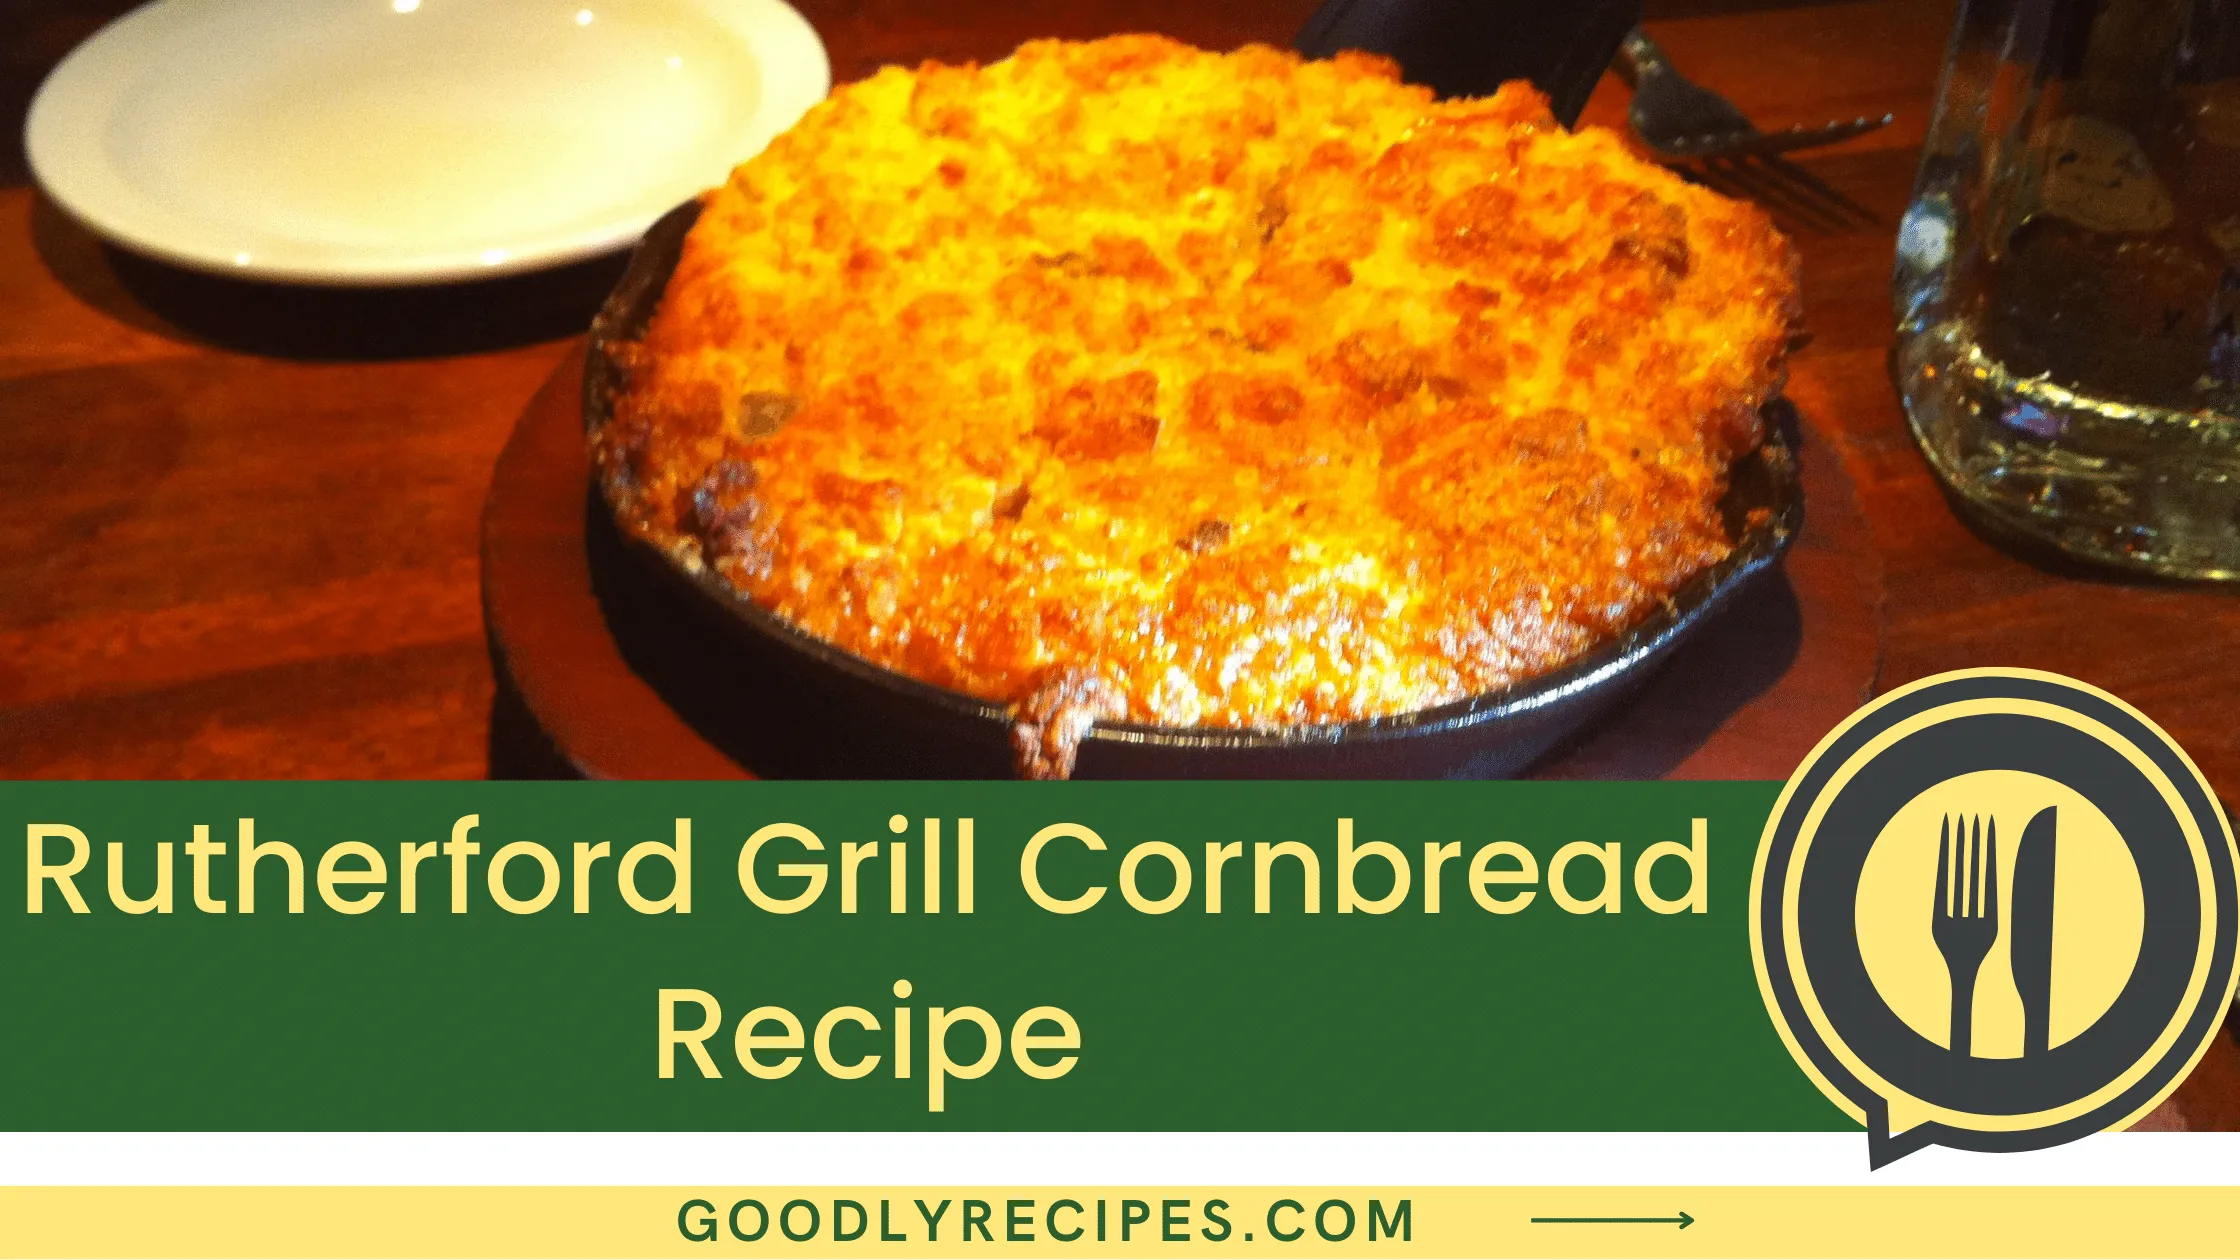 What is Rutherford Grill Cornbread?